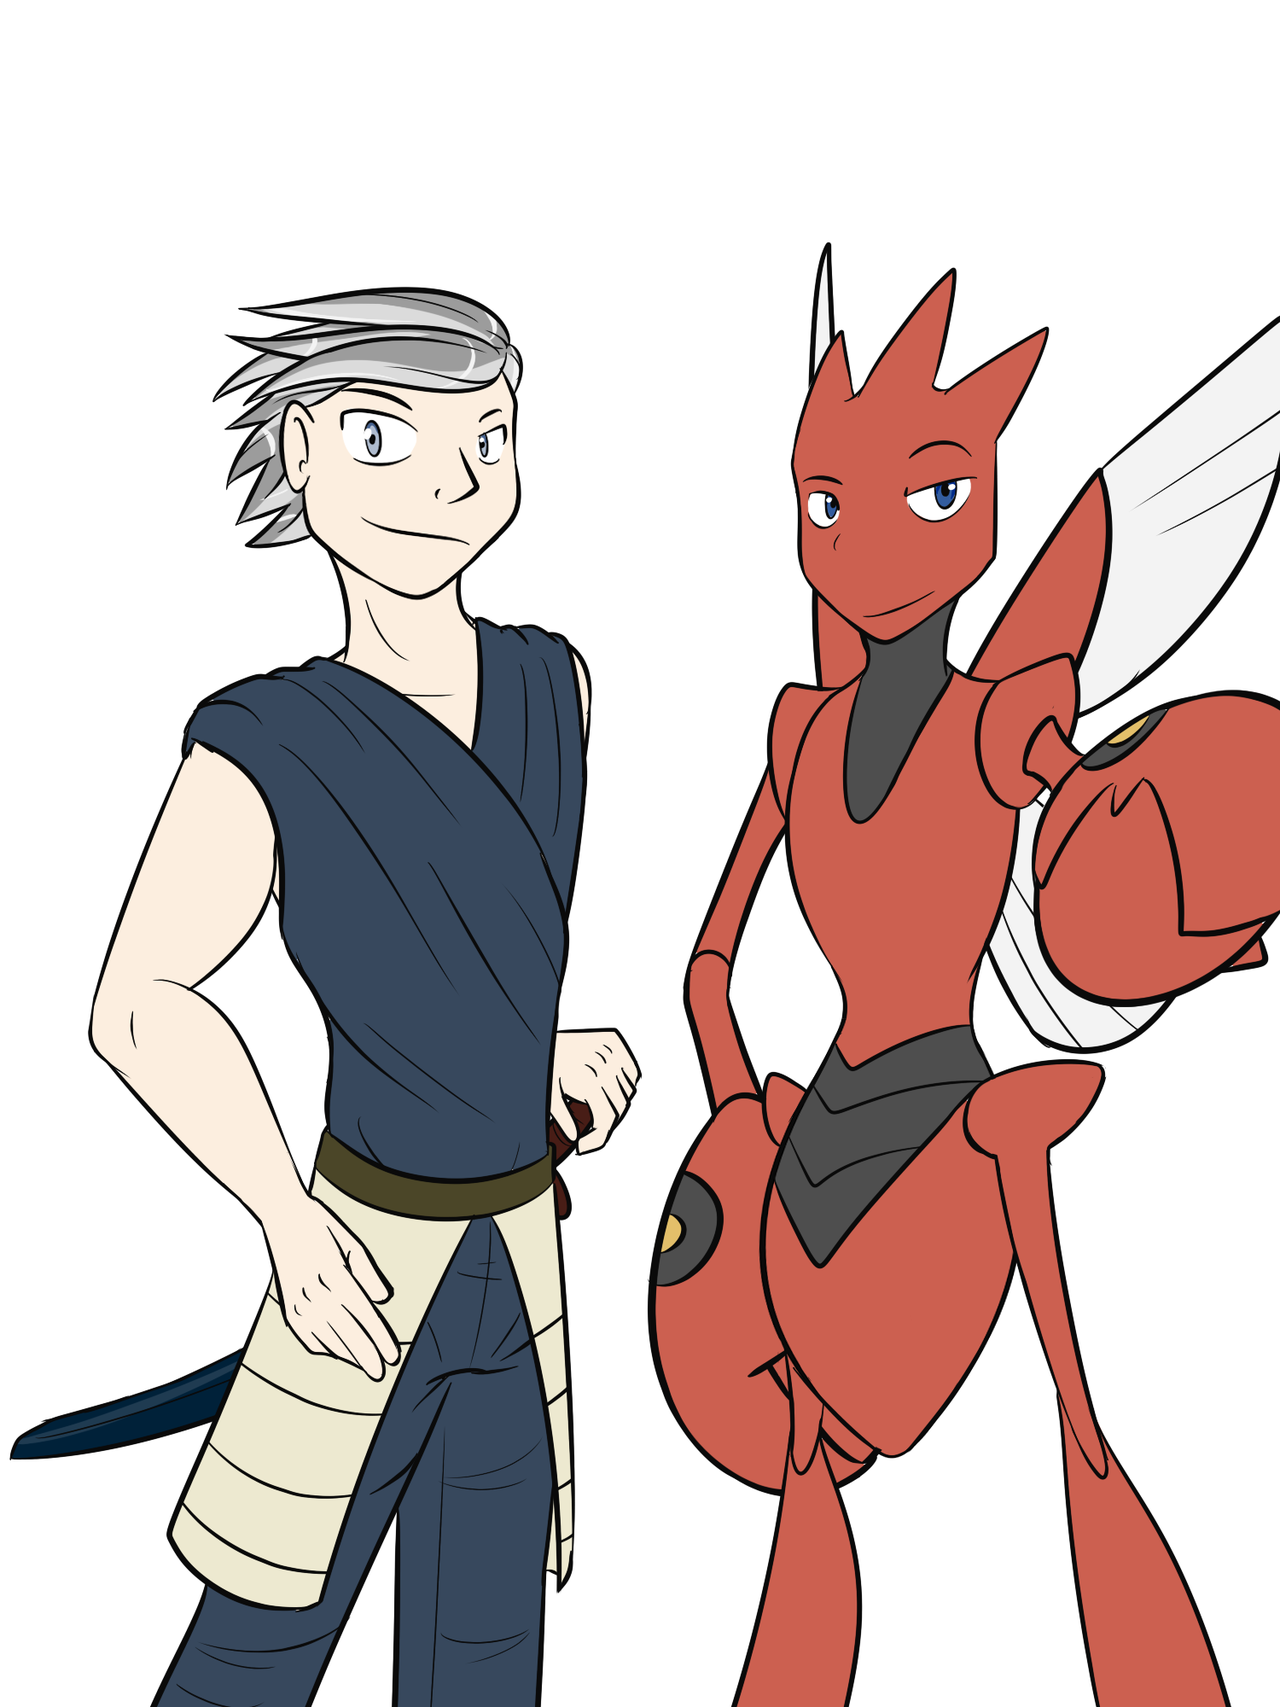 Gym Leader Design - KenSo for my Fan-Game that I started on, but never got around